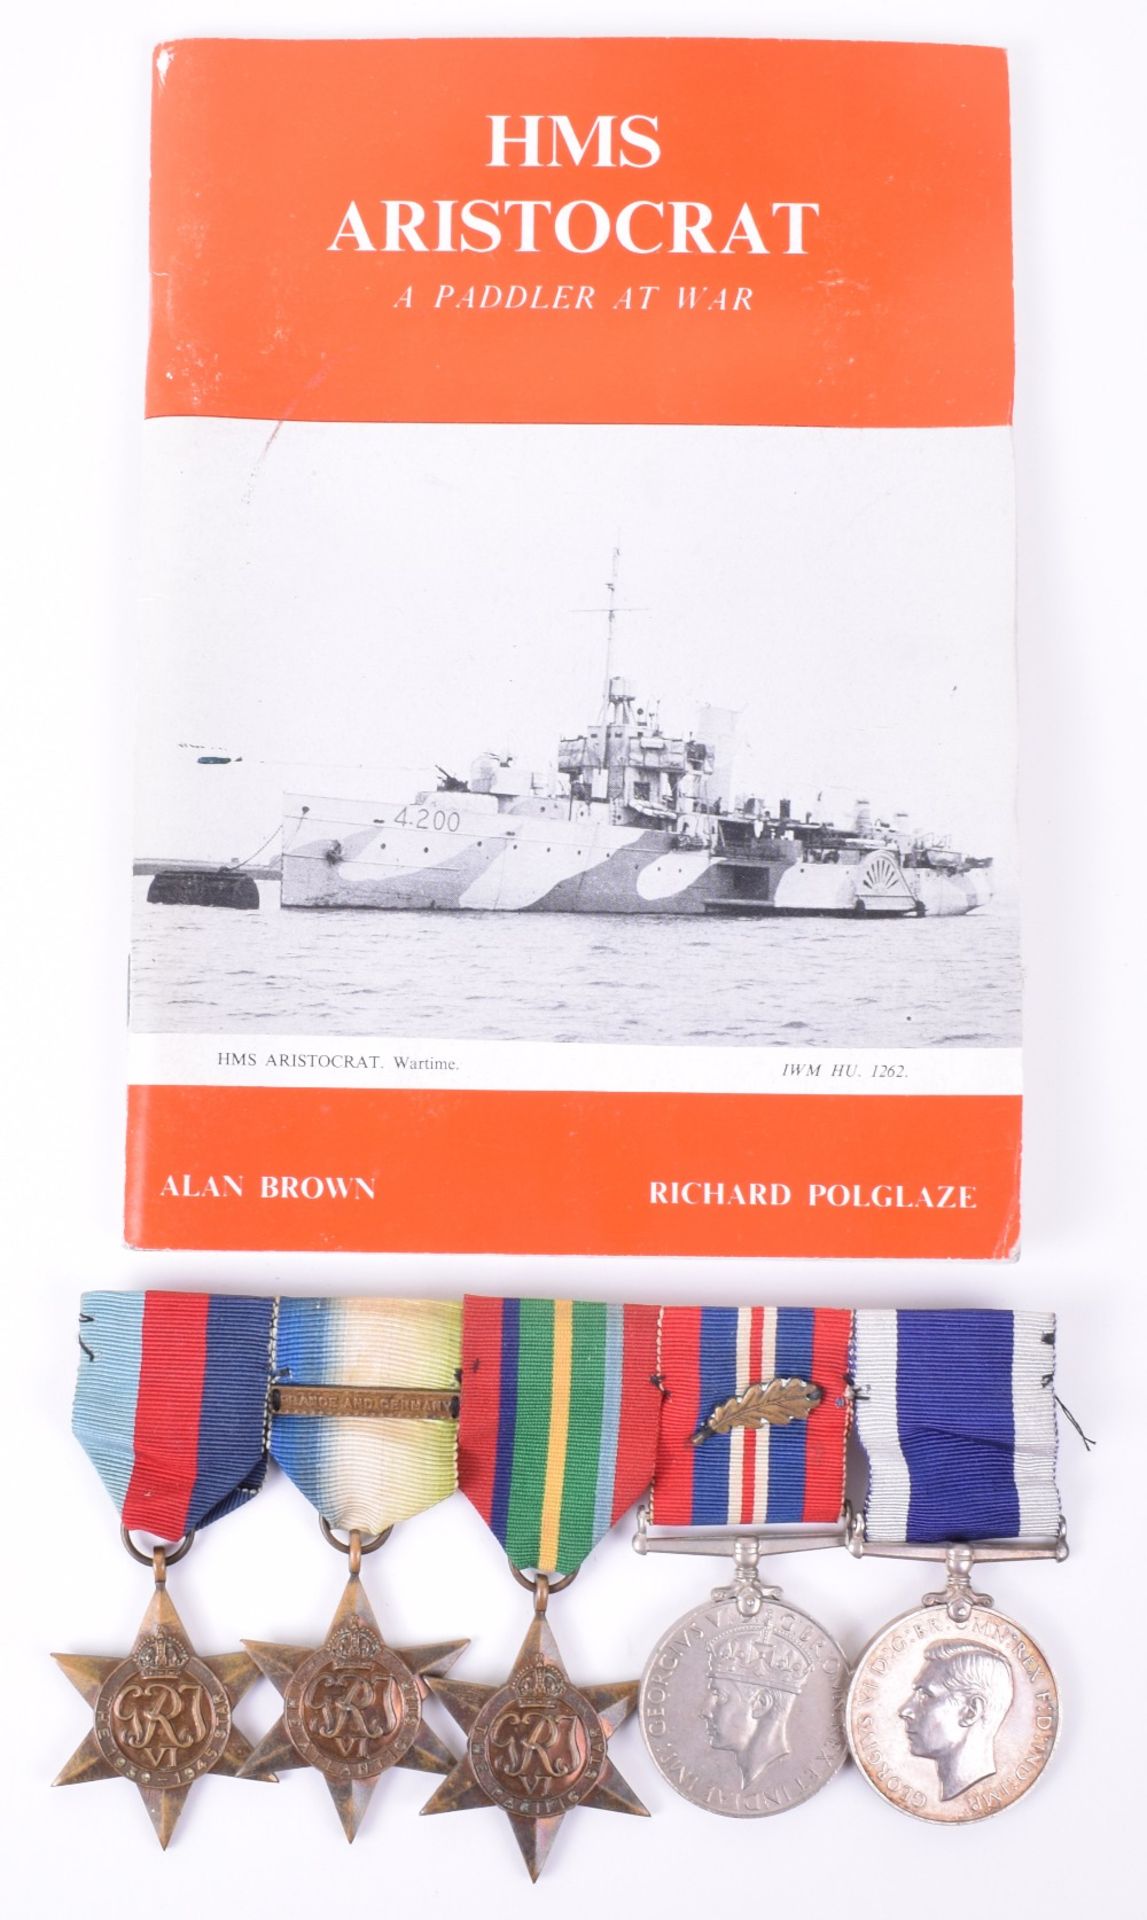 WW2 Royal Navy Long Service and Mentioned in Despatches Medal Group of Five HMS Suffolk and HMS Aris - Image 4 of 4